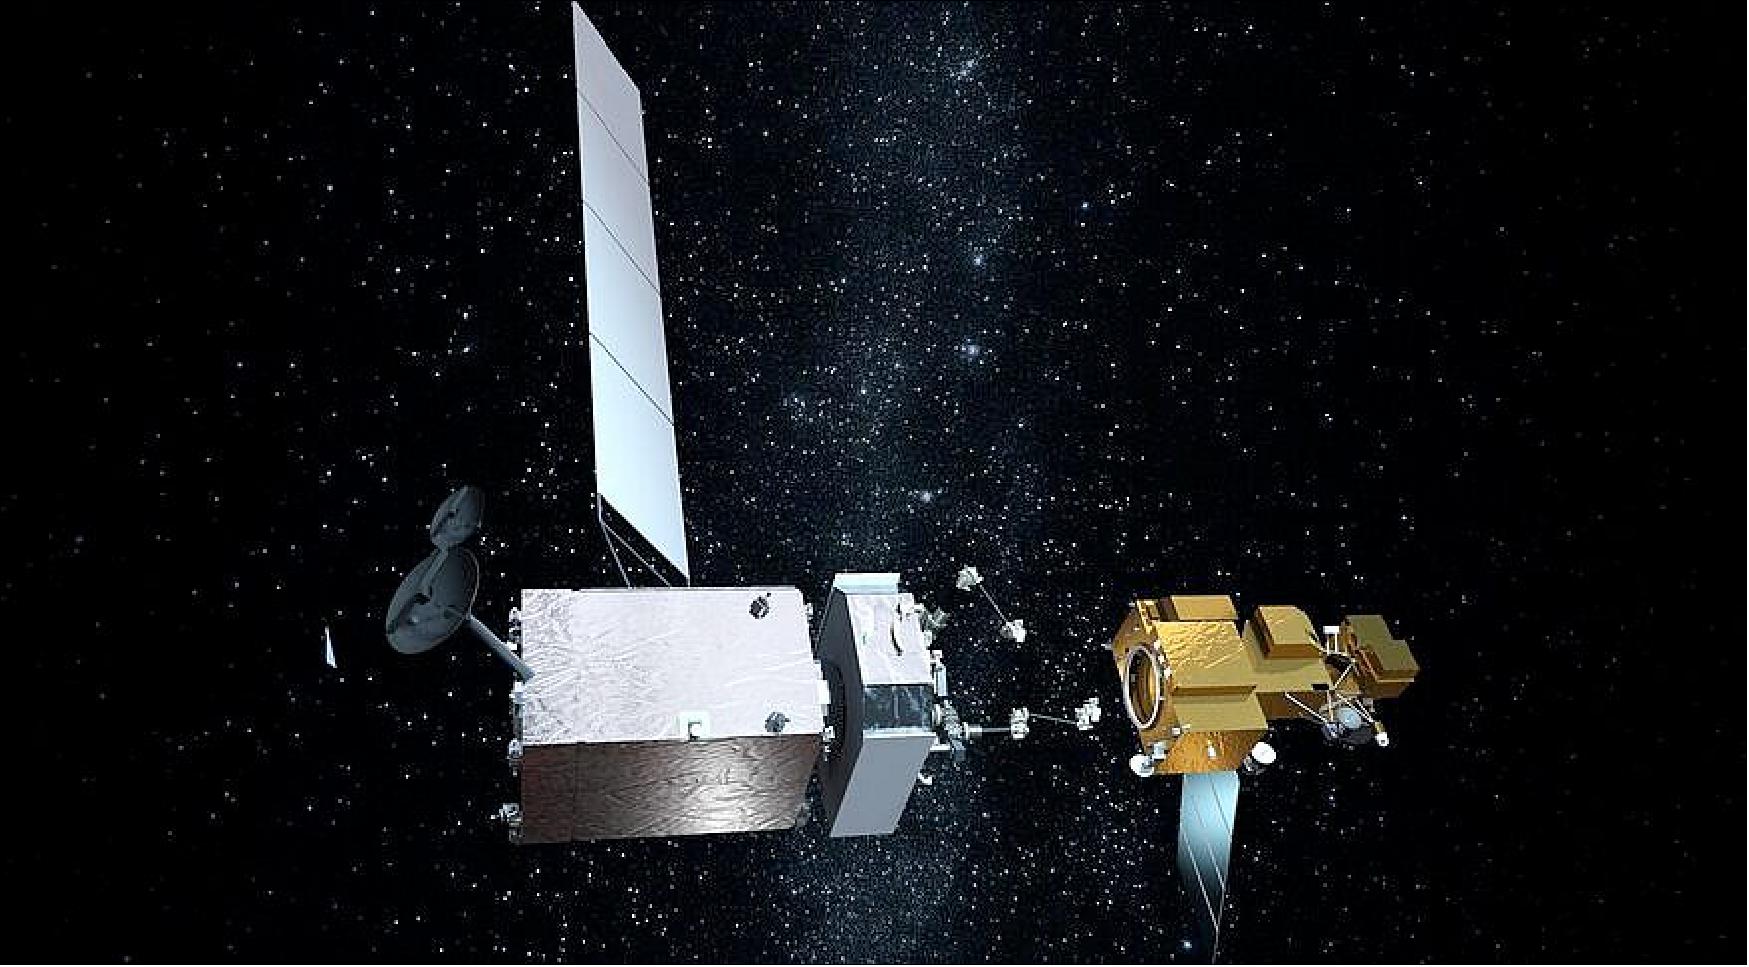 Figure 9: NASA's OSAM-1 mission is designed to demonstrate satellite servicing technologies, but those technologies could also support efforts to remove orbital debris (image credit: NASA)